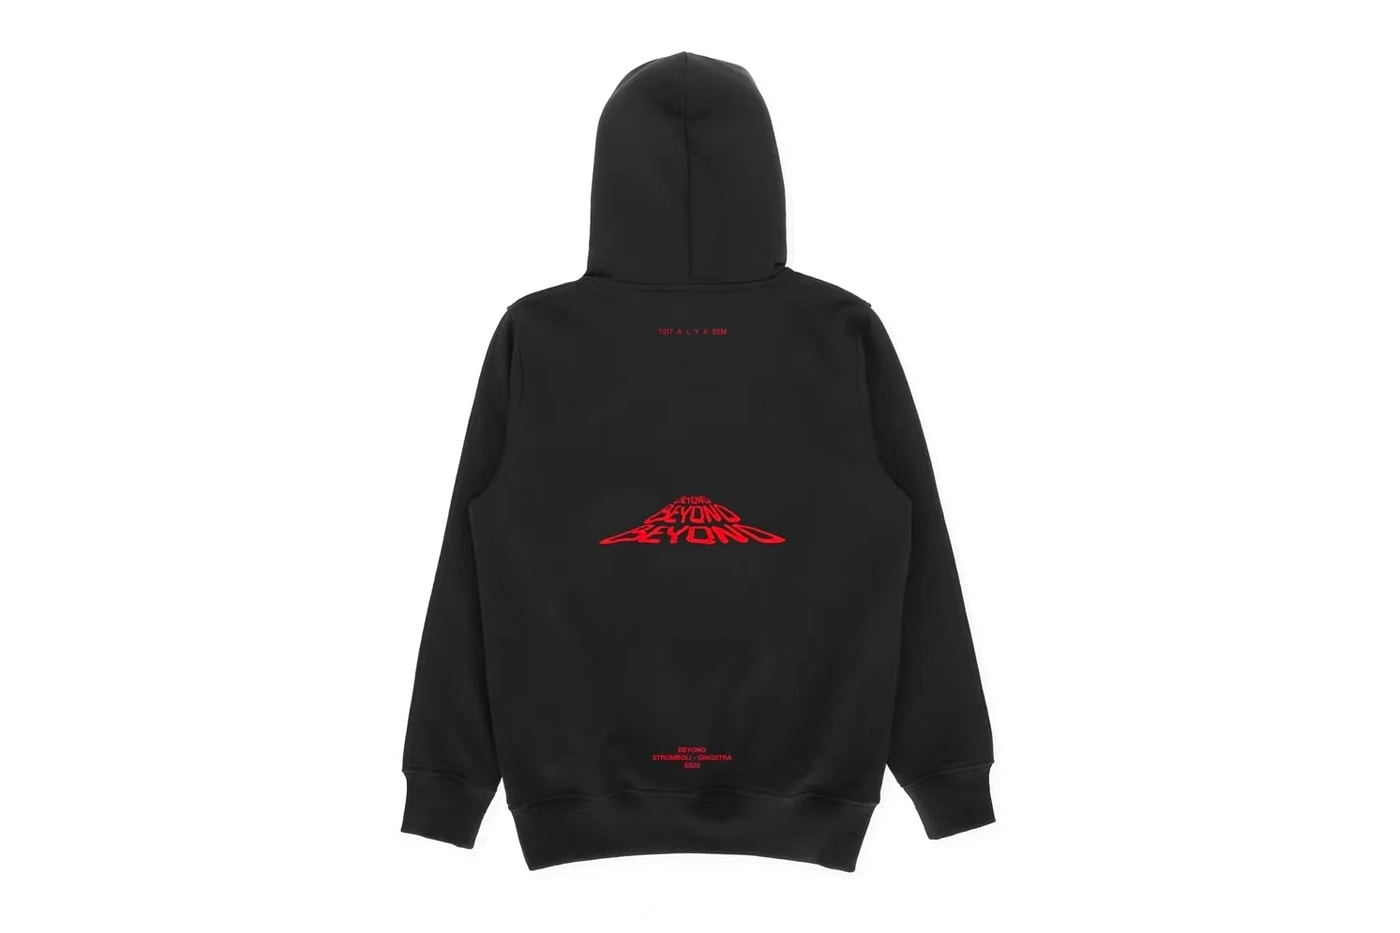 1017 alyx 9SM necklace hoodie t-shirt volcanic lava volcano Aeolian island Stromboli Italy Beyond SS22 Spring summer 2022 available capsule collection release info